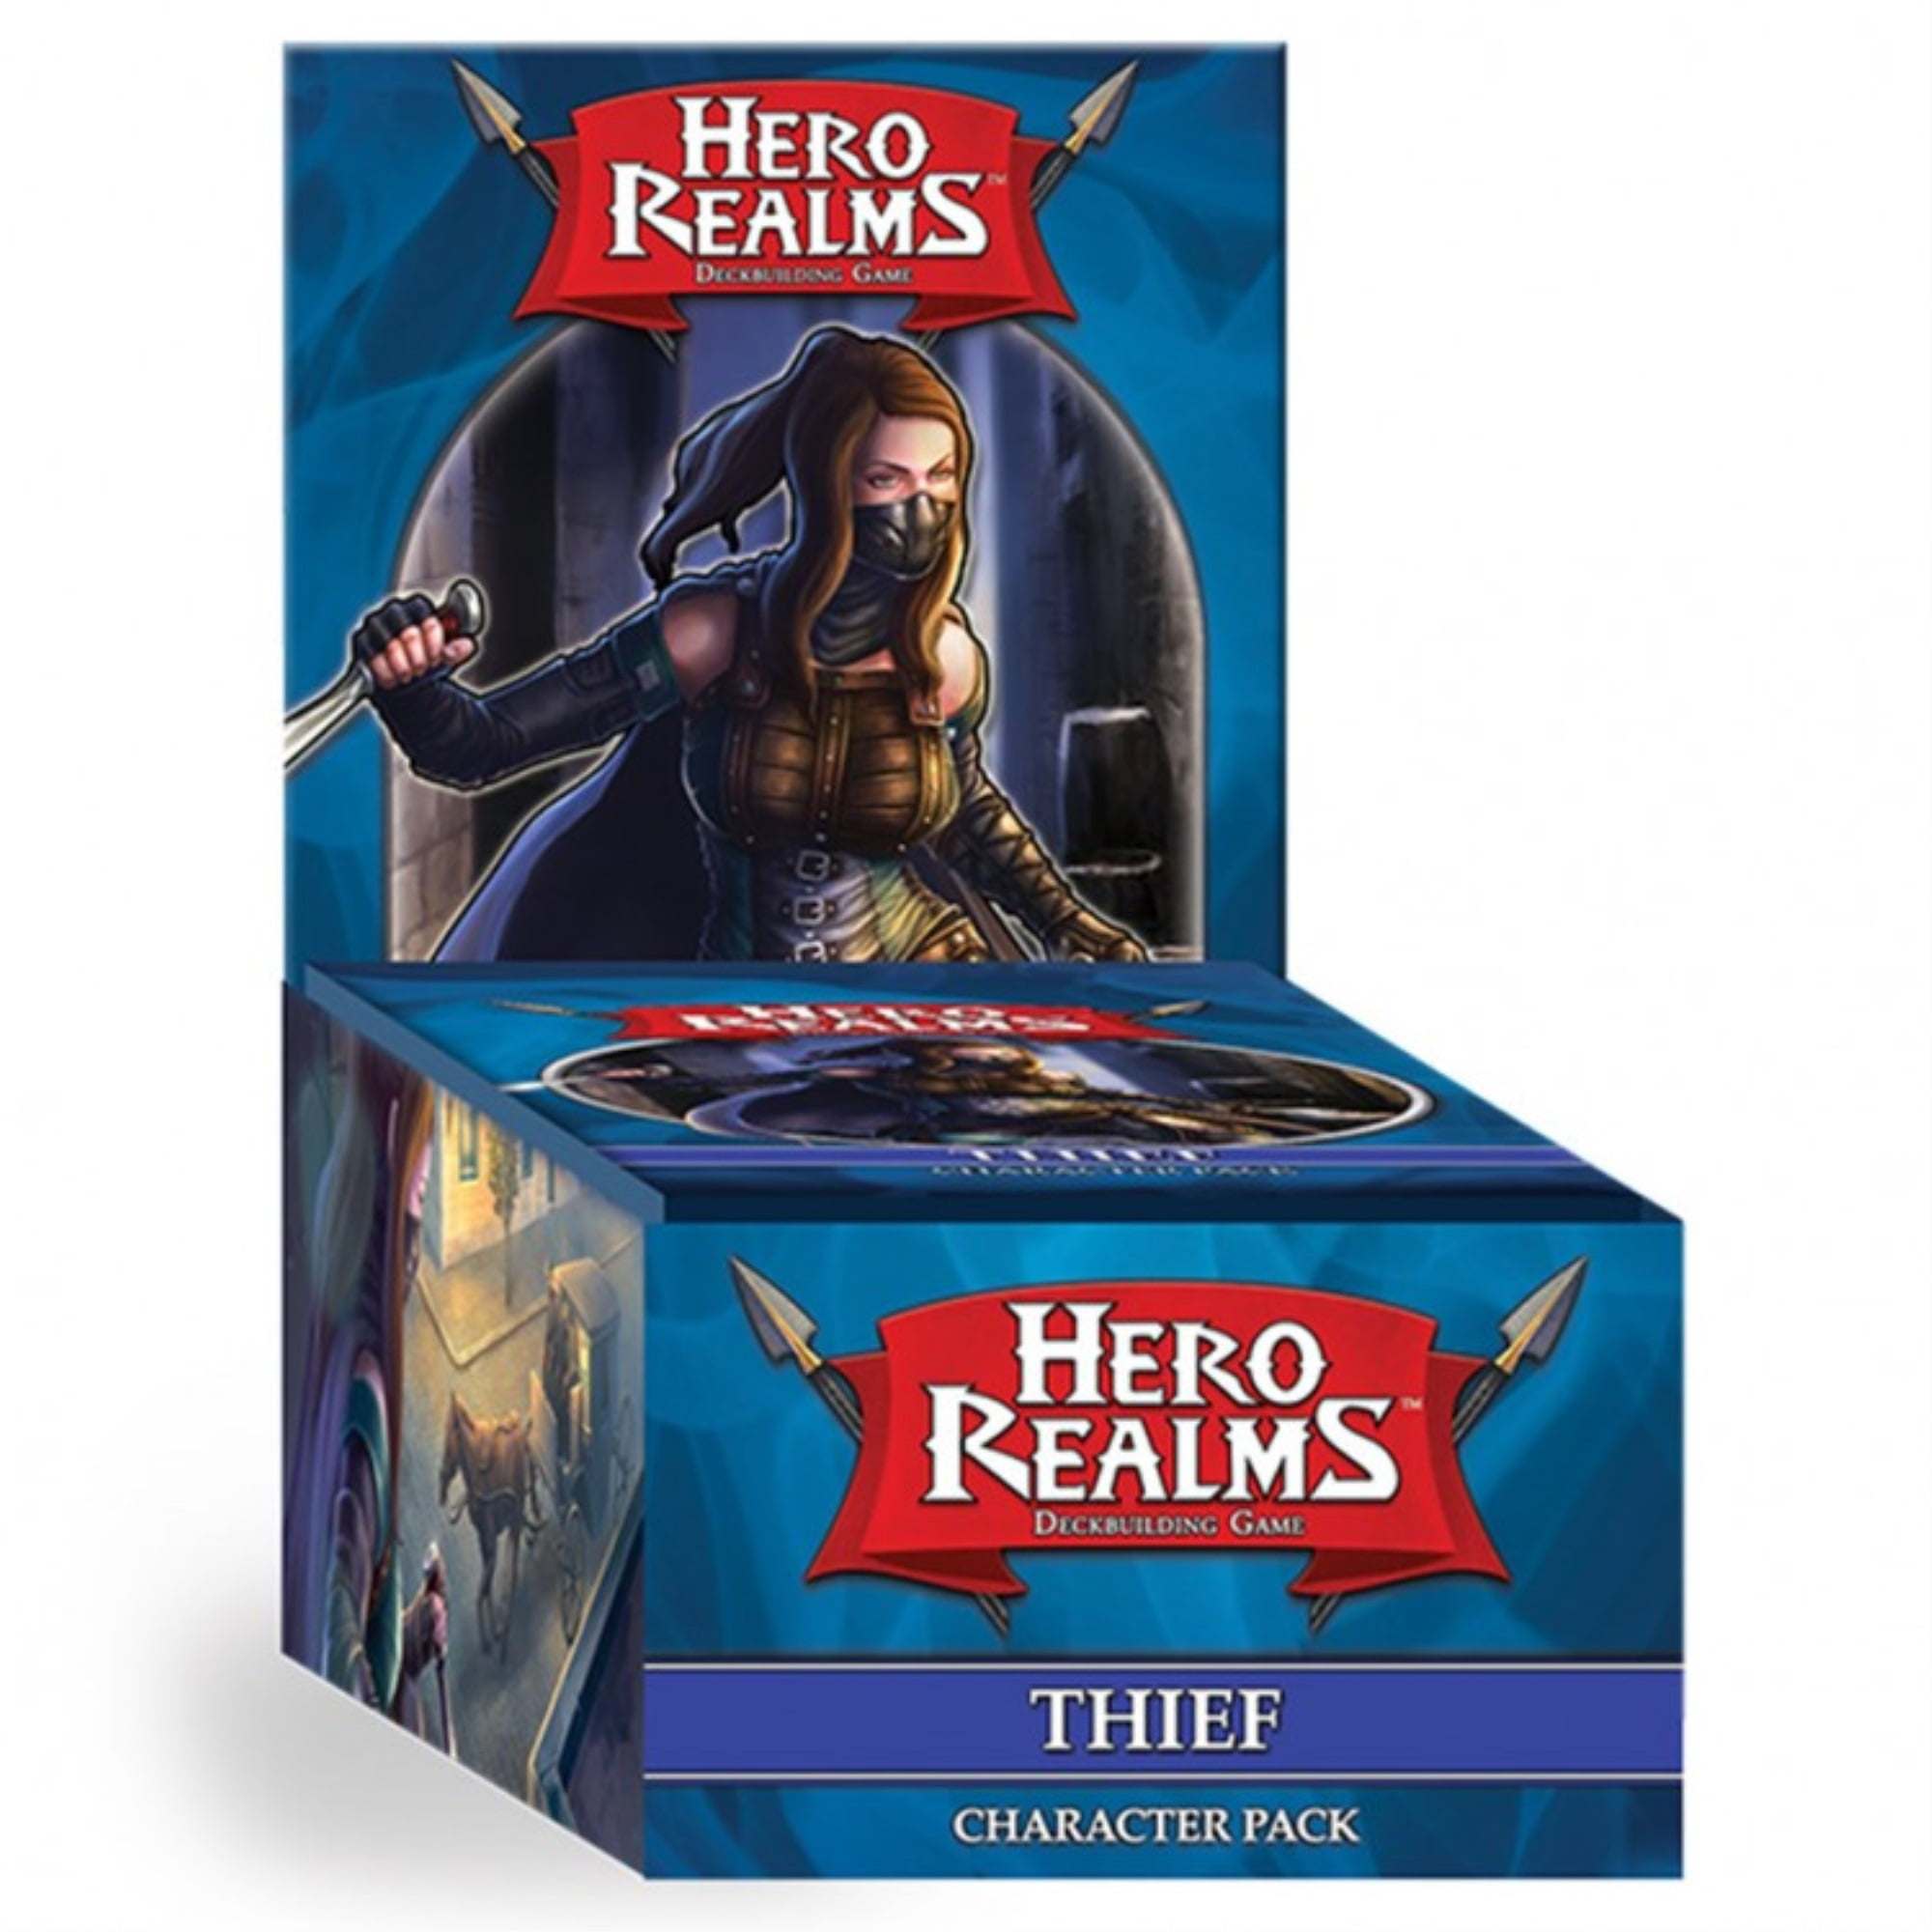 Wwg504d Hero Realms - Thief Pack Display, 12 Count